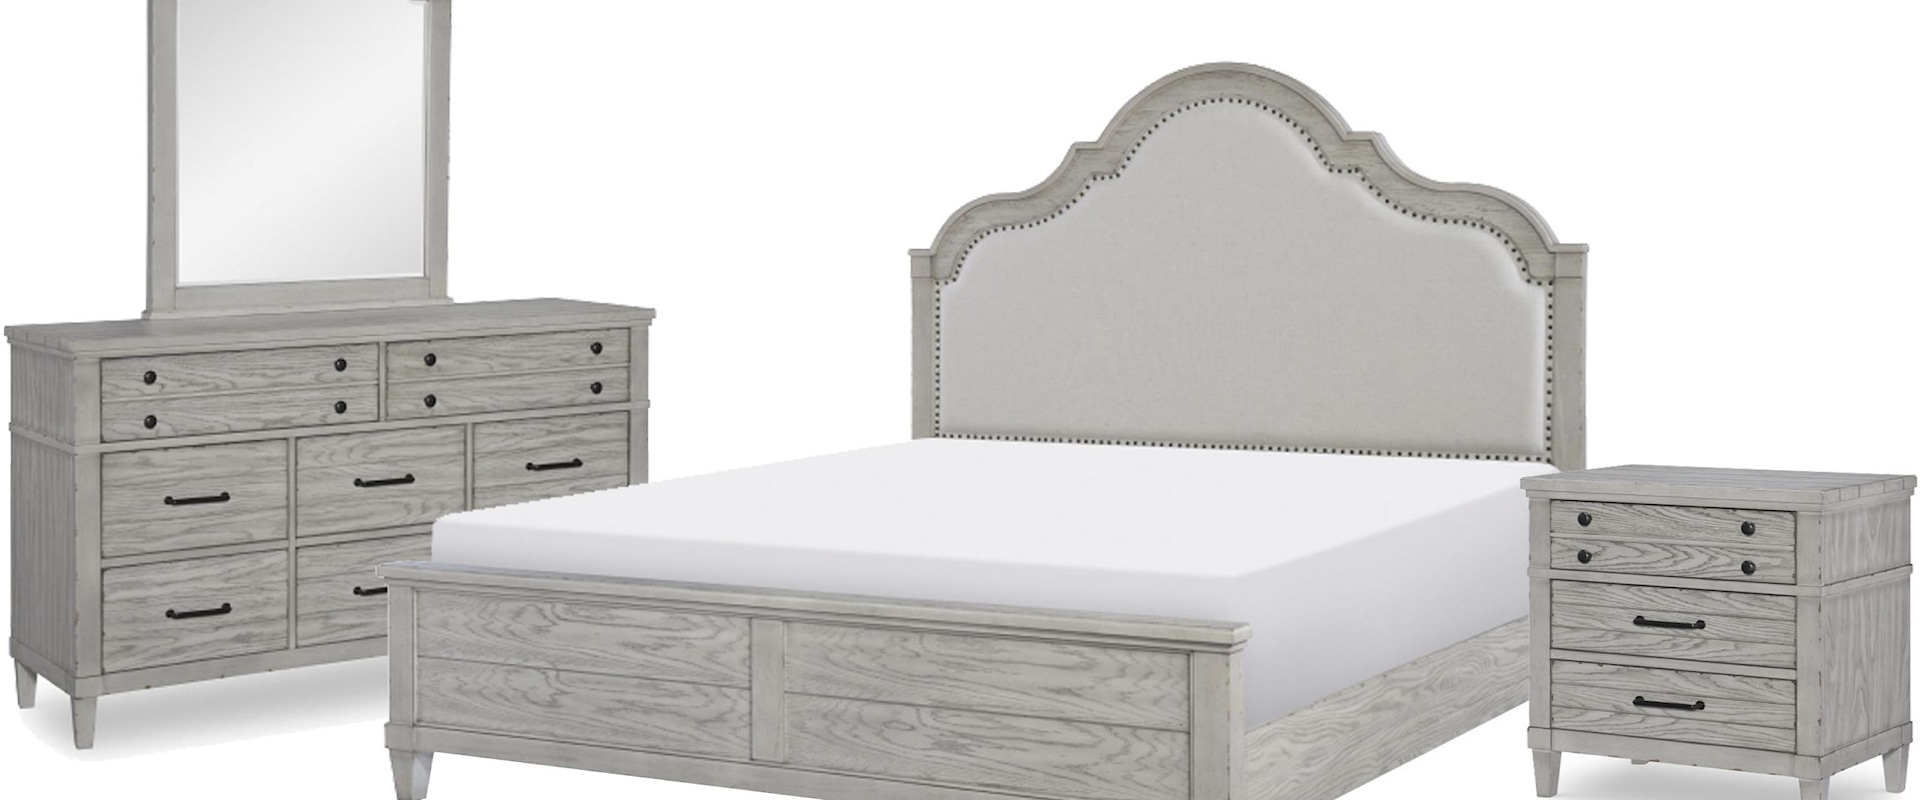 Queen Upholstered Panel Bed, 8 Drawer Dresser, Arched Mirror, and Nightstand